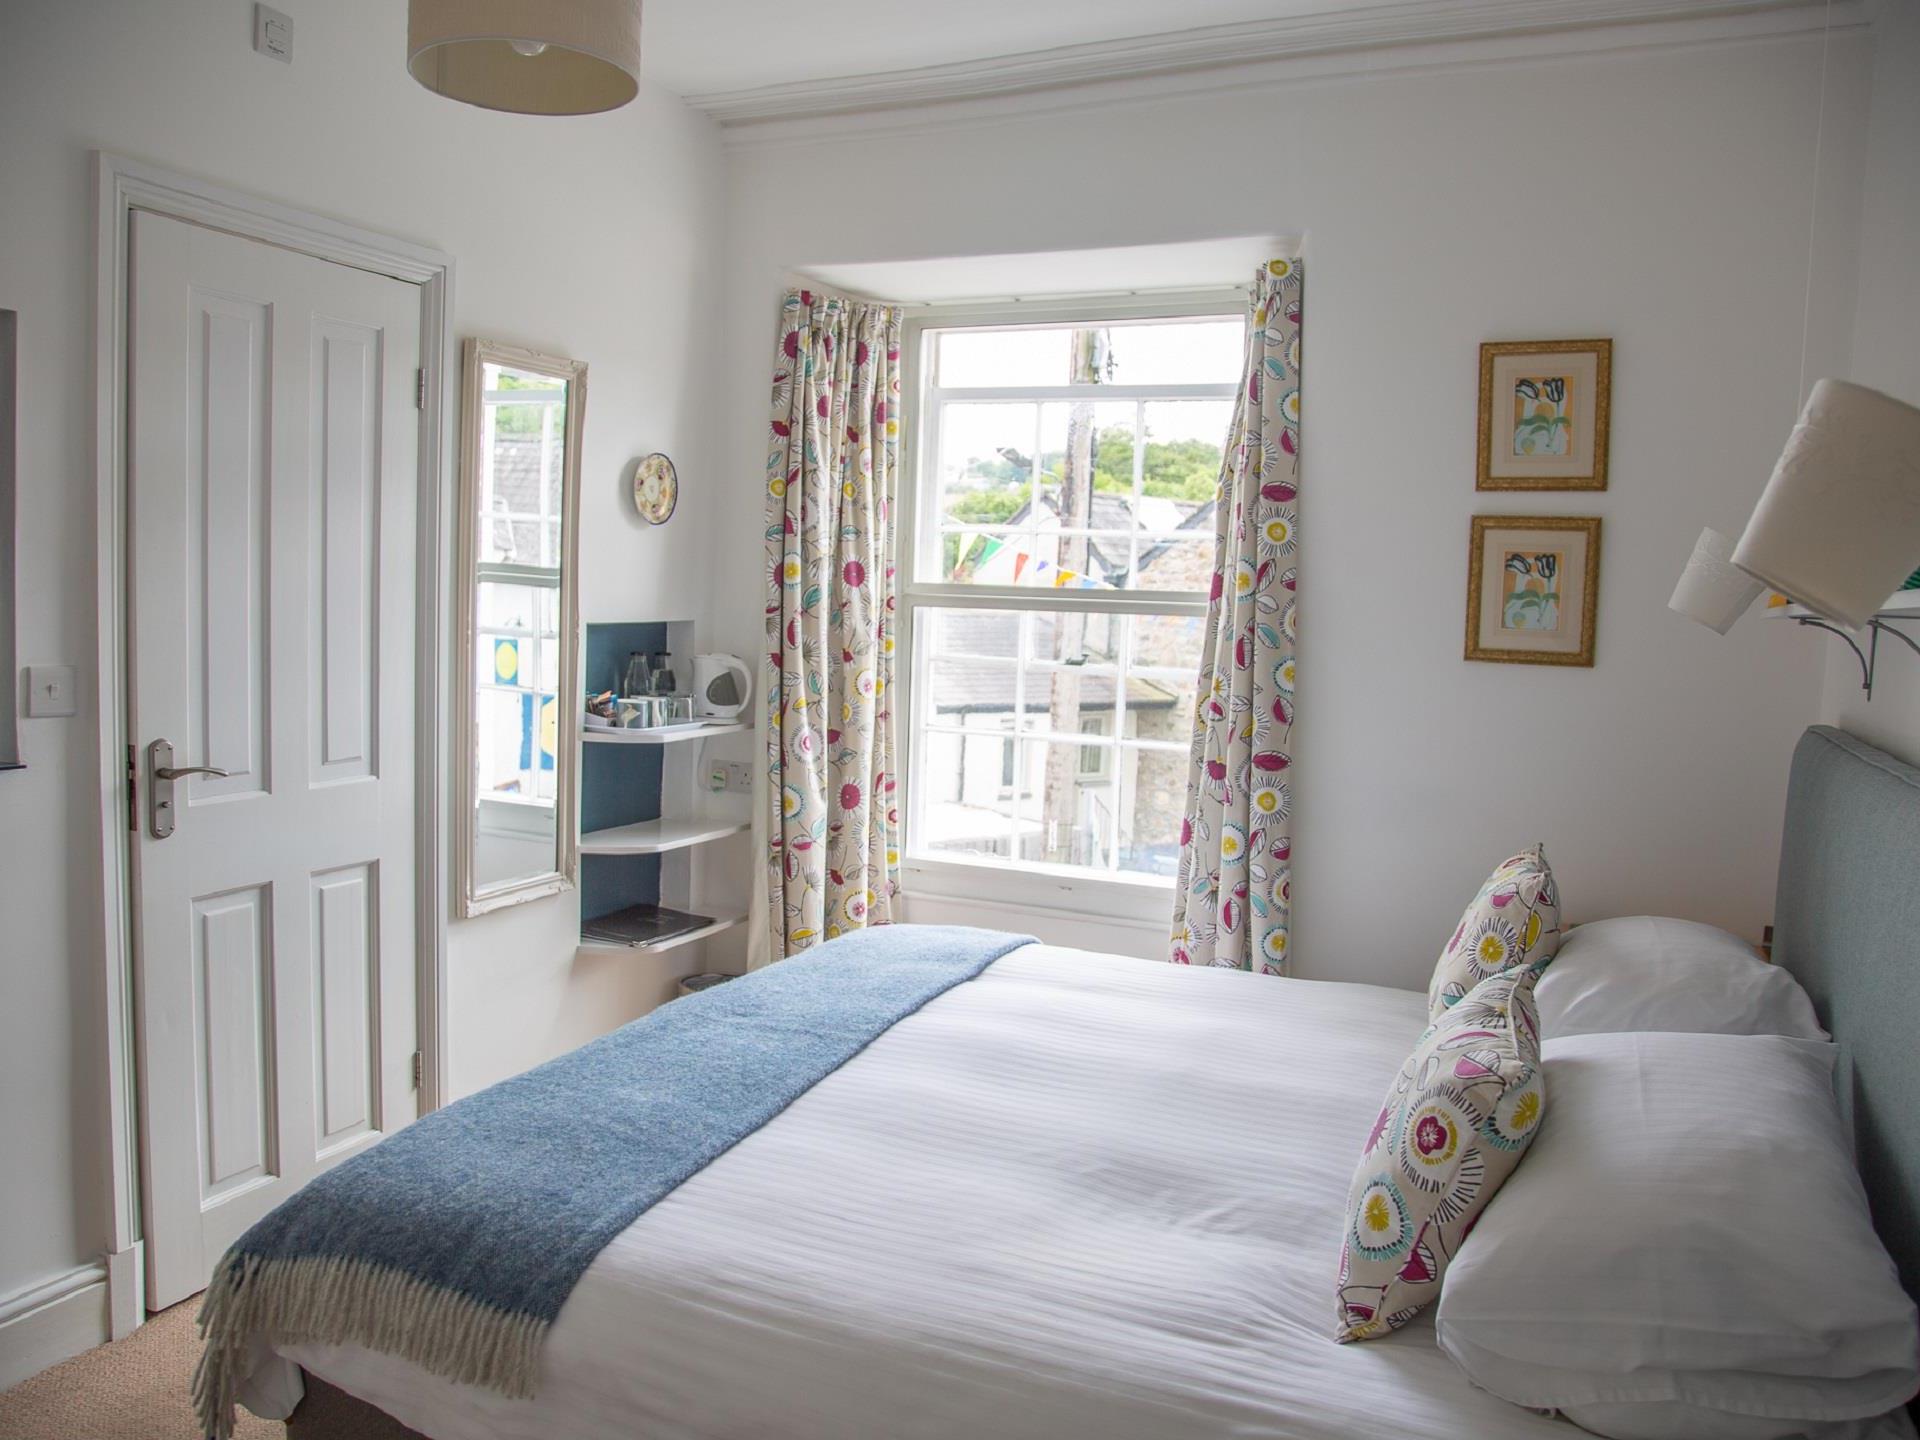 Ensuite Bedroom with views of Carn Ingli